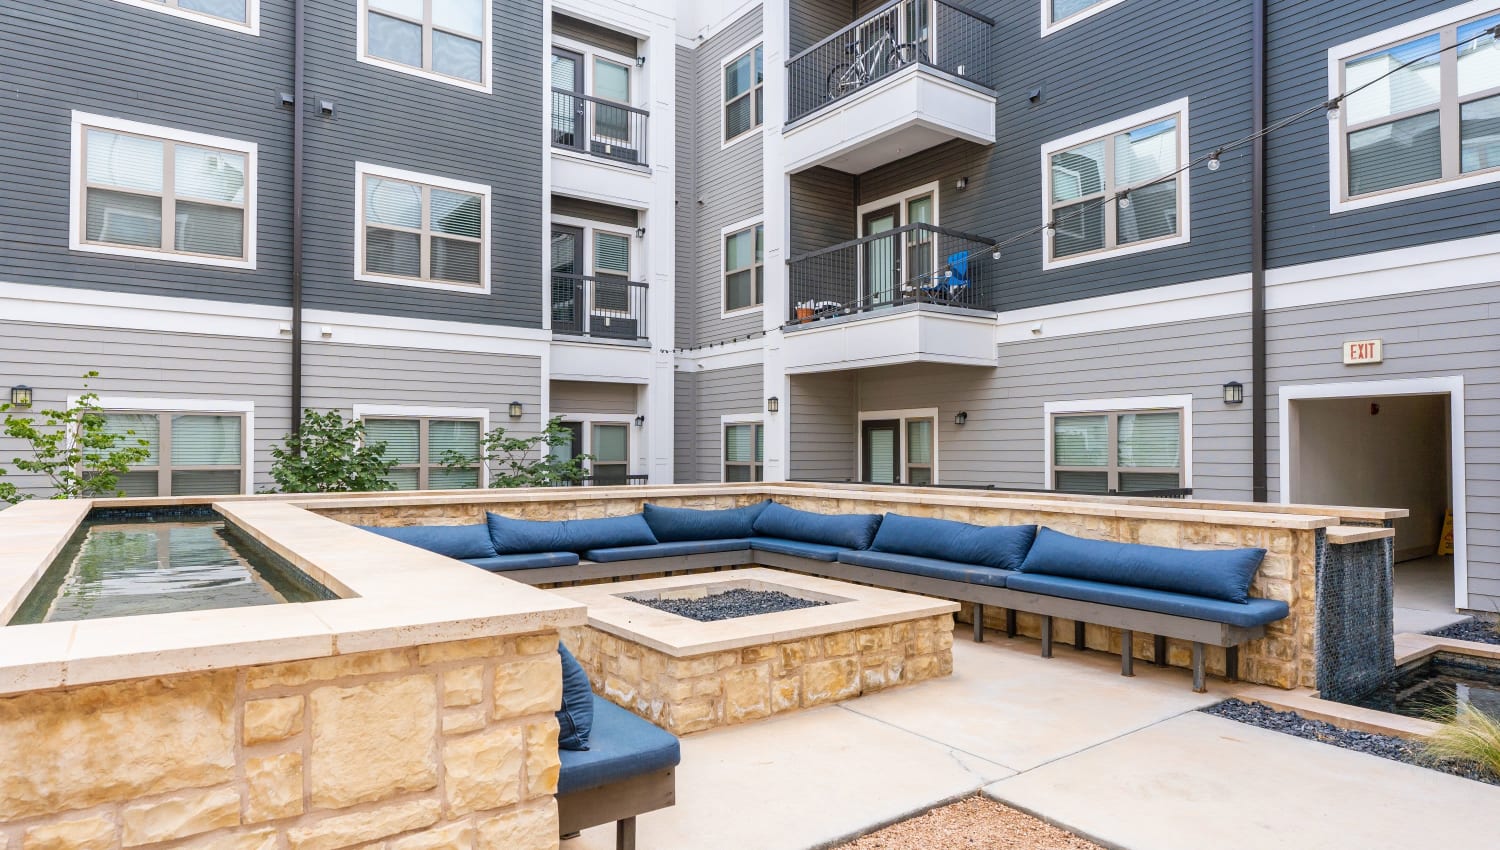 Another view of the exterior firepit at The Everett at Ally Village in Midland, Texas